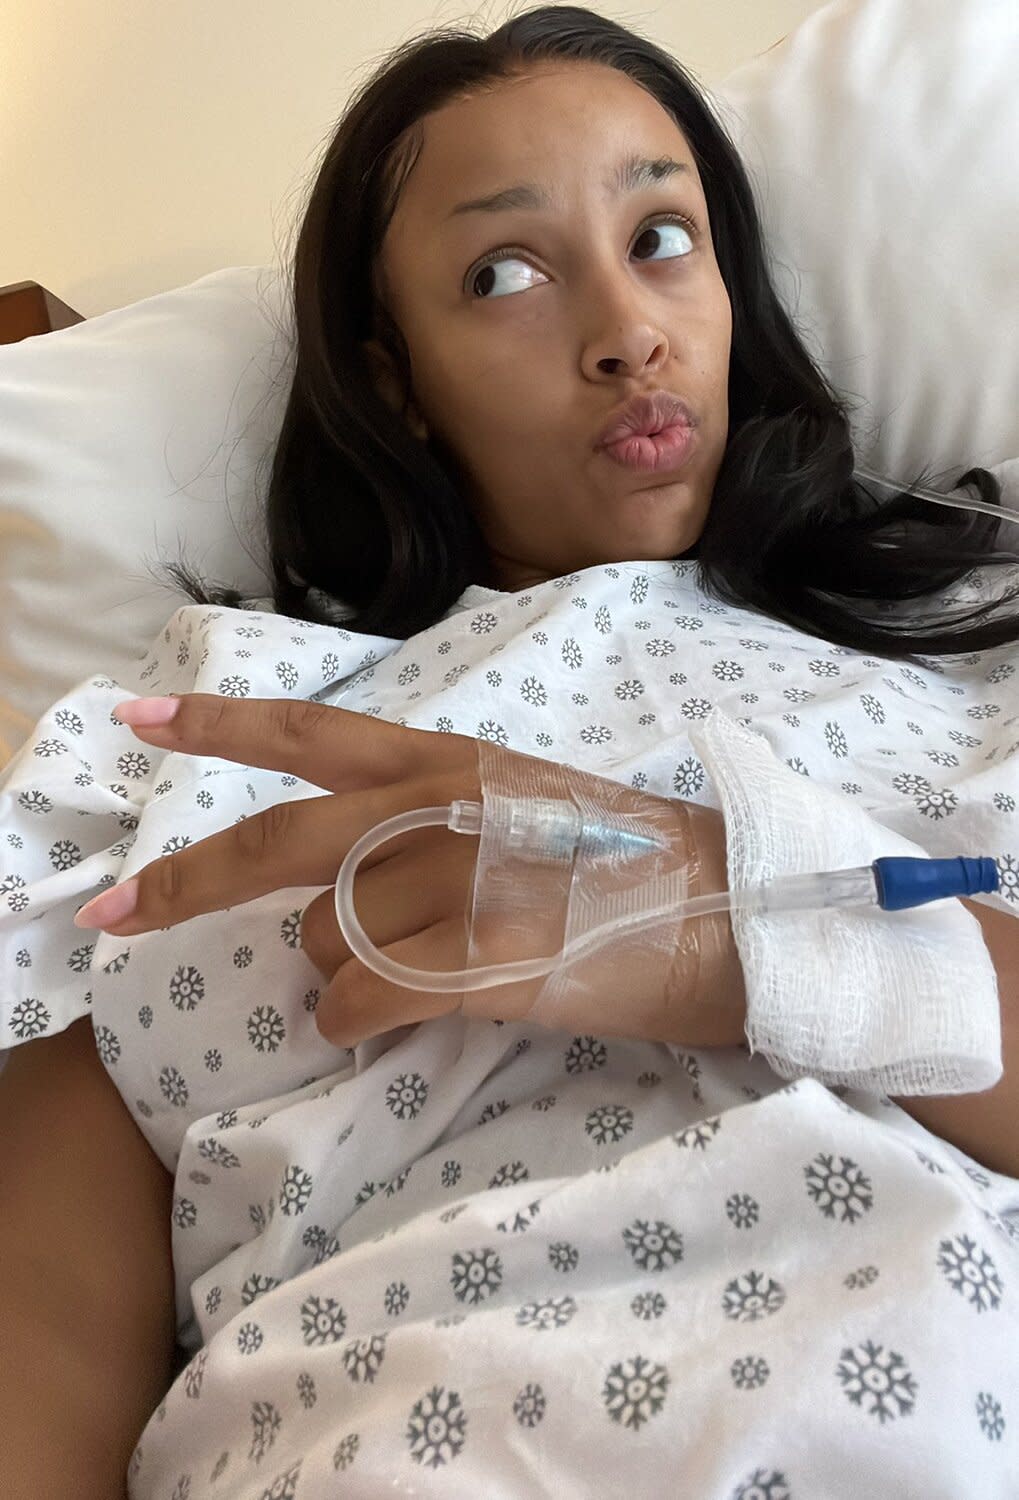 Doja Cat Shares Hospital Photos, Reveals Raspy Voice After Undergoing Tonsil Surgery from Infection